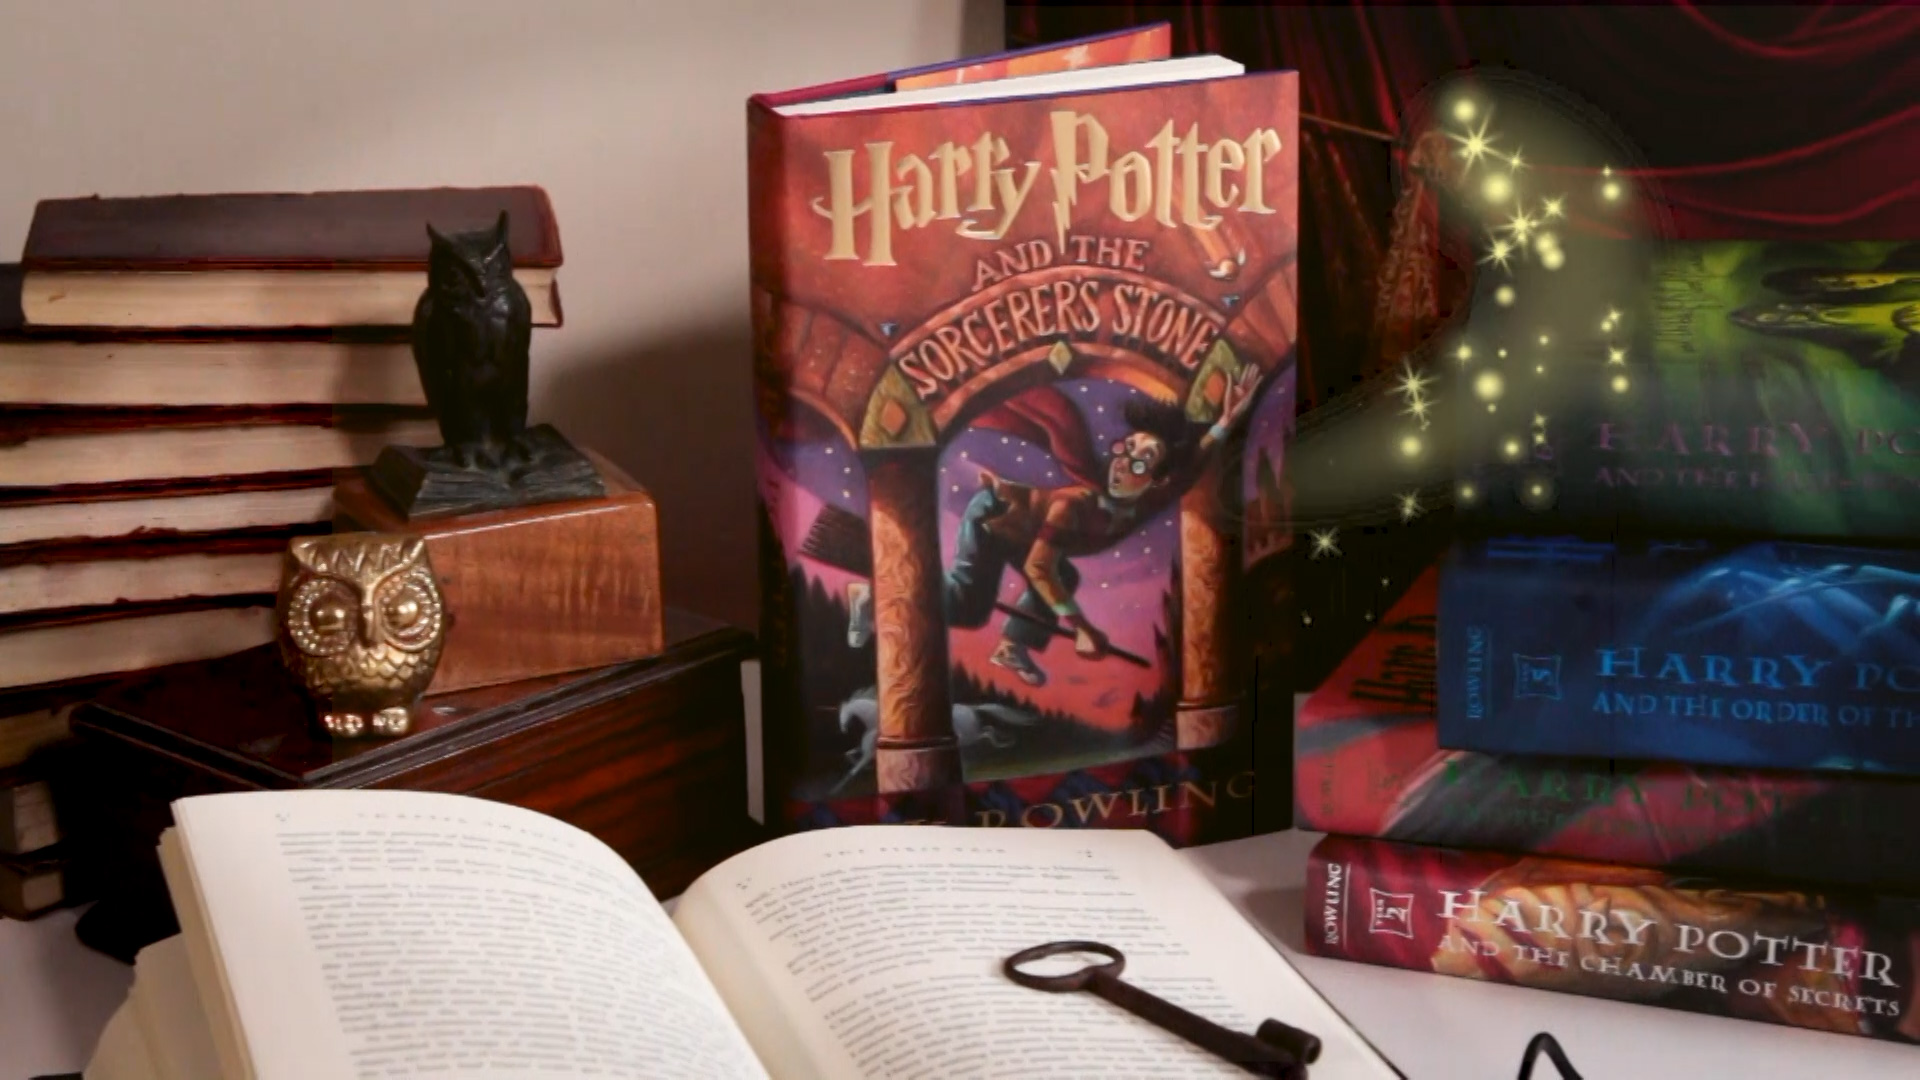 Scholastic celebrates 25 years of Harry Potter and the Sorcerer's